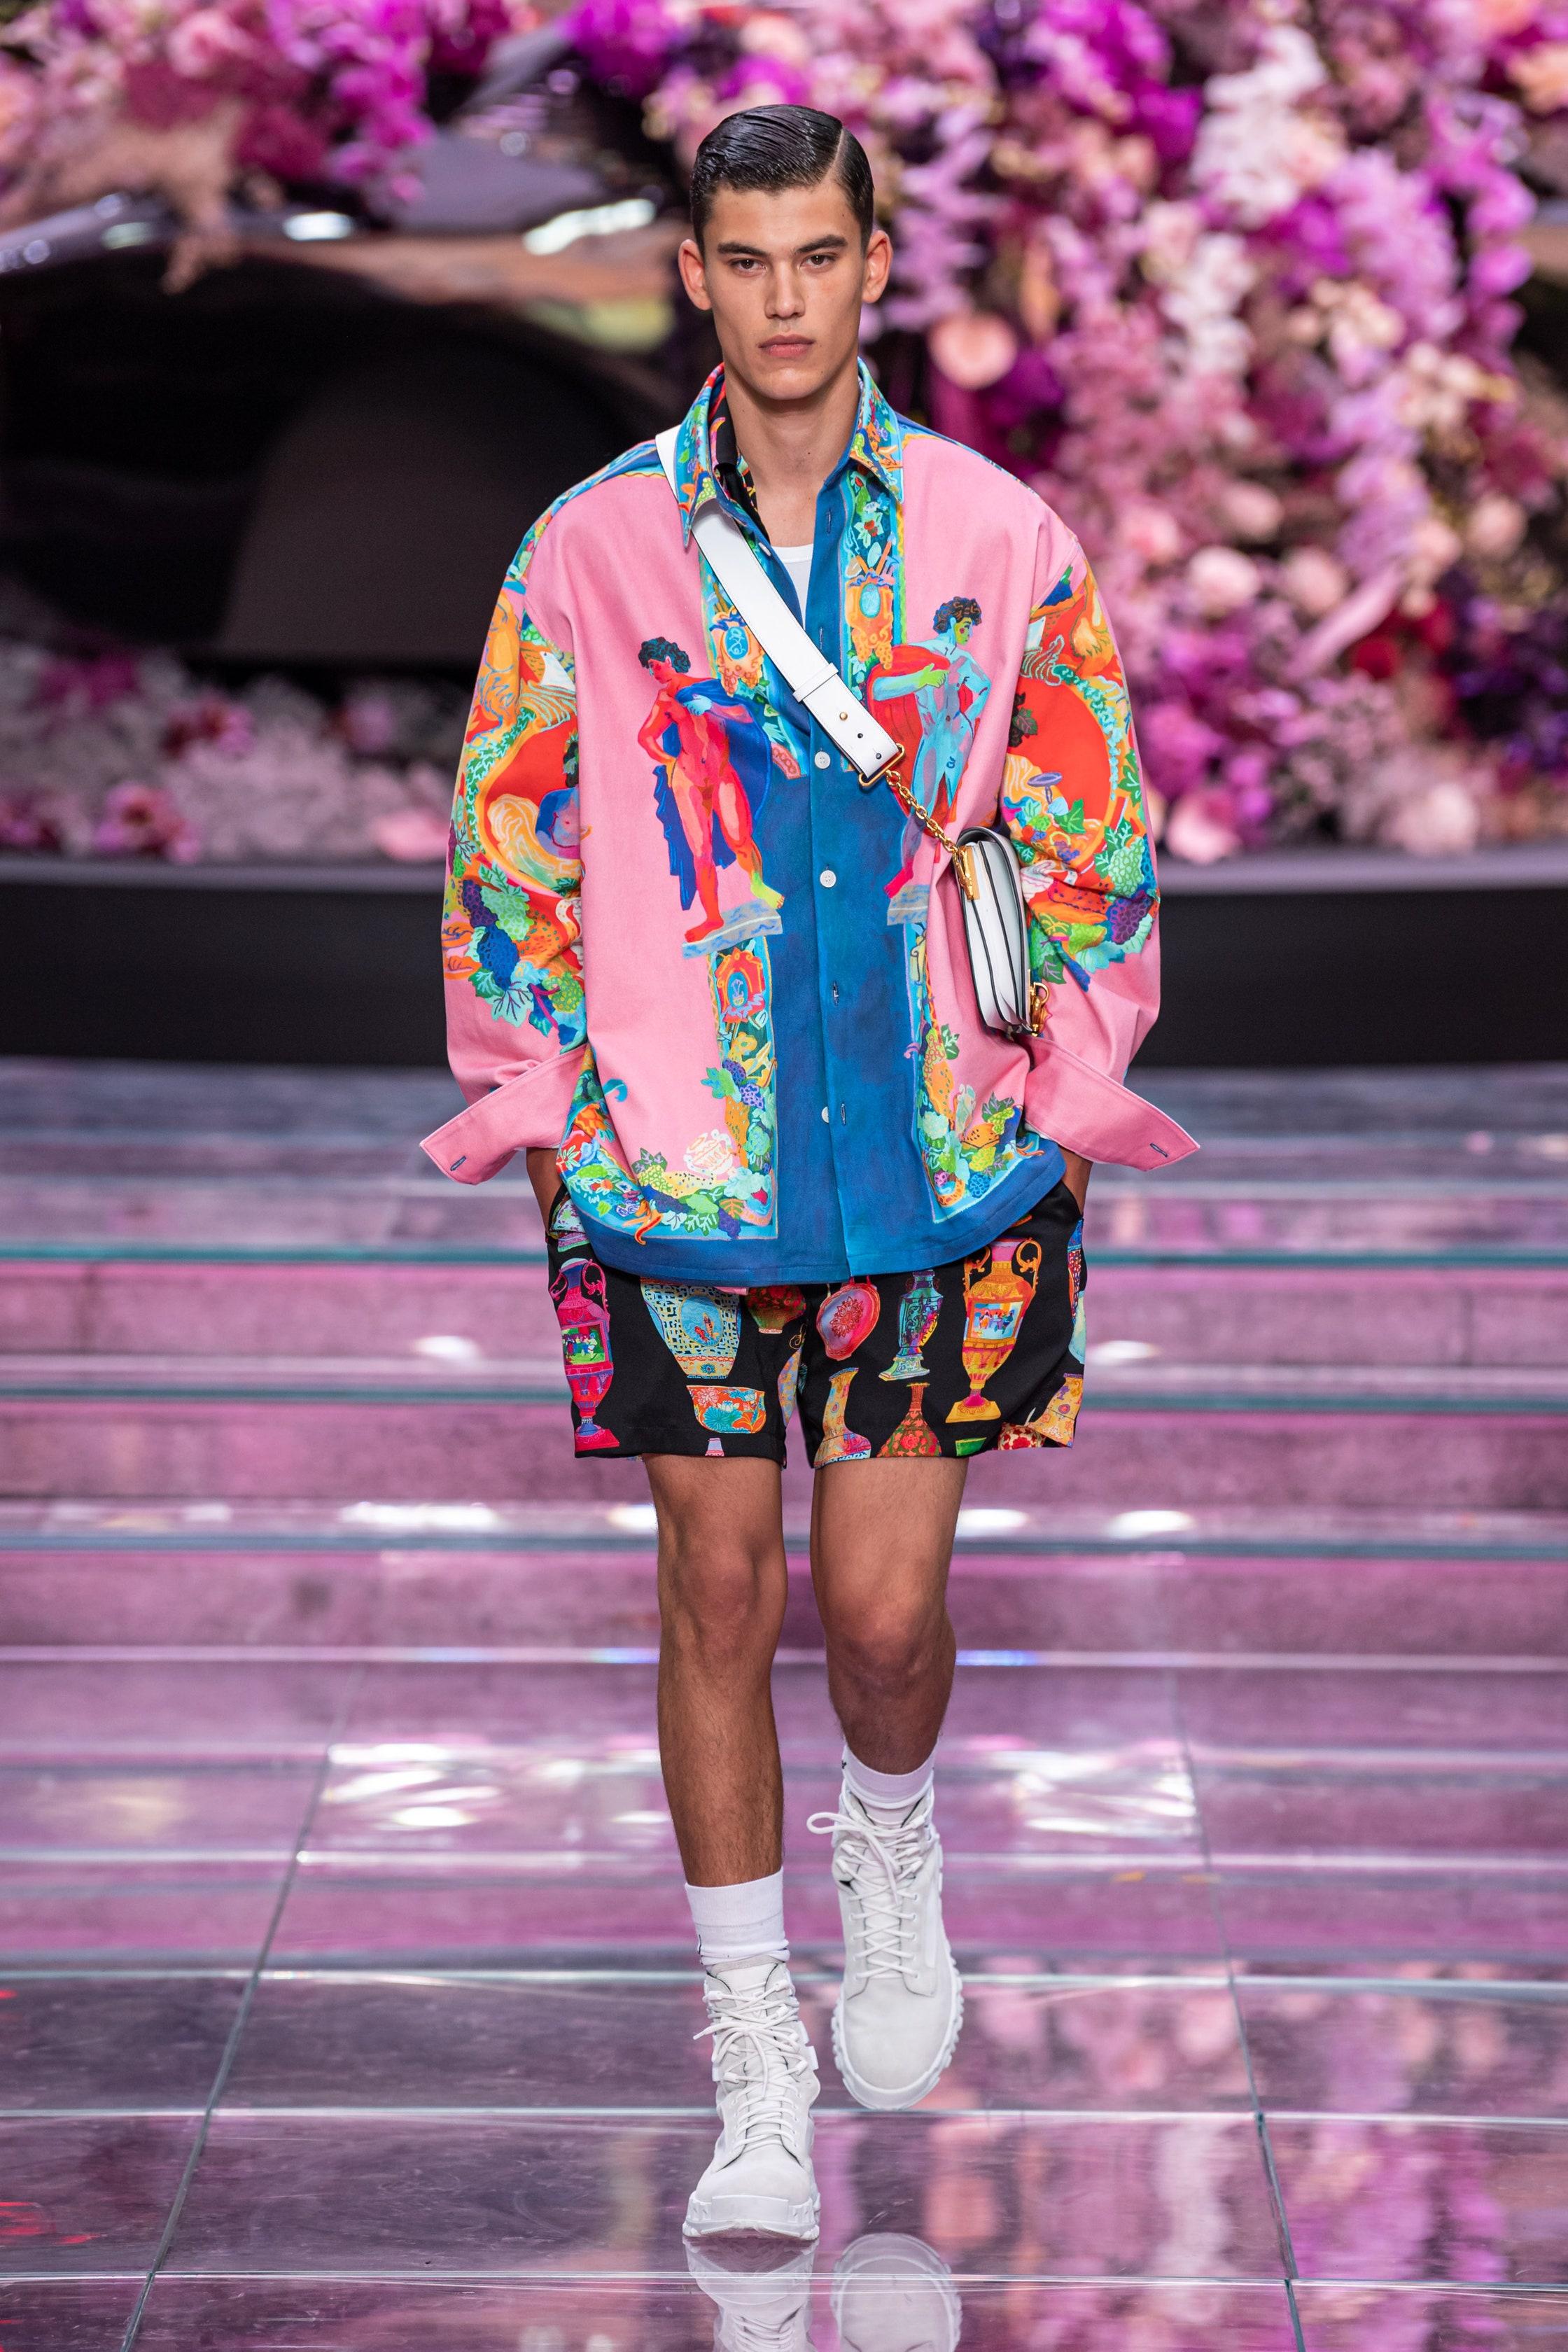 new VERSACE 2020 Runway Andy Dixon Caravaggio Archive pink silk shirt EU40 L Reference: TGAS/C00286 
Brand: Versace 
Designer: Donatella Versace 
Collection: Spring Summer 2020 Runway 
Material: Silk 
Color: Pink 
Pattern: Caraggio 
Closure: Button